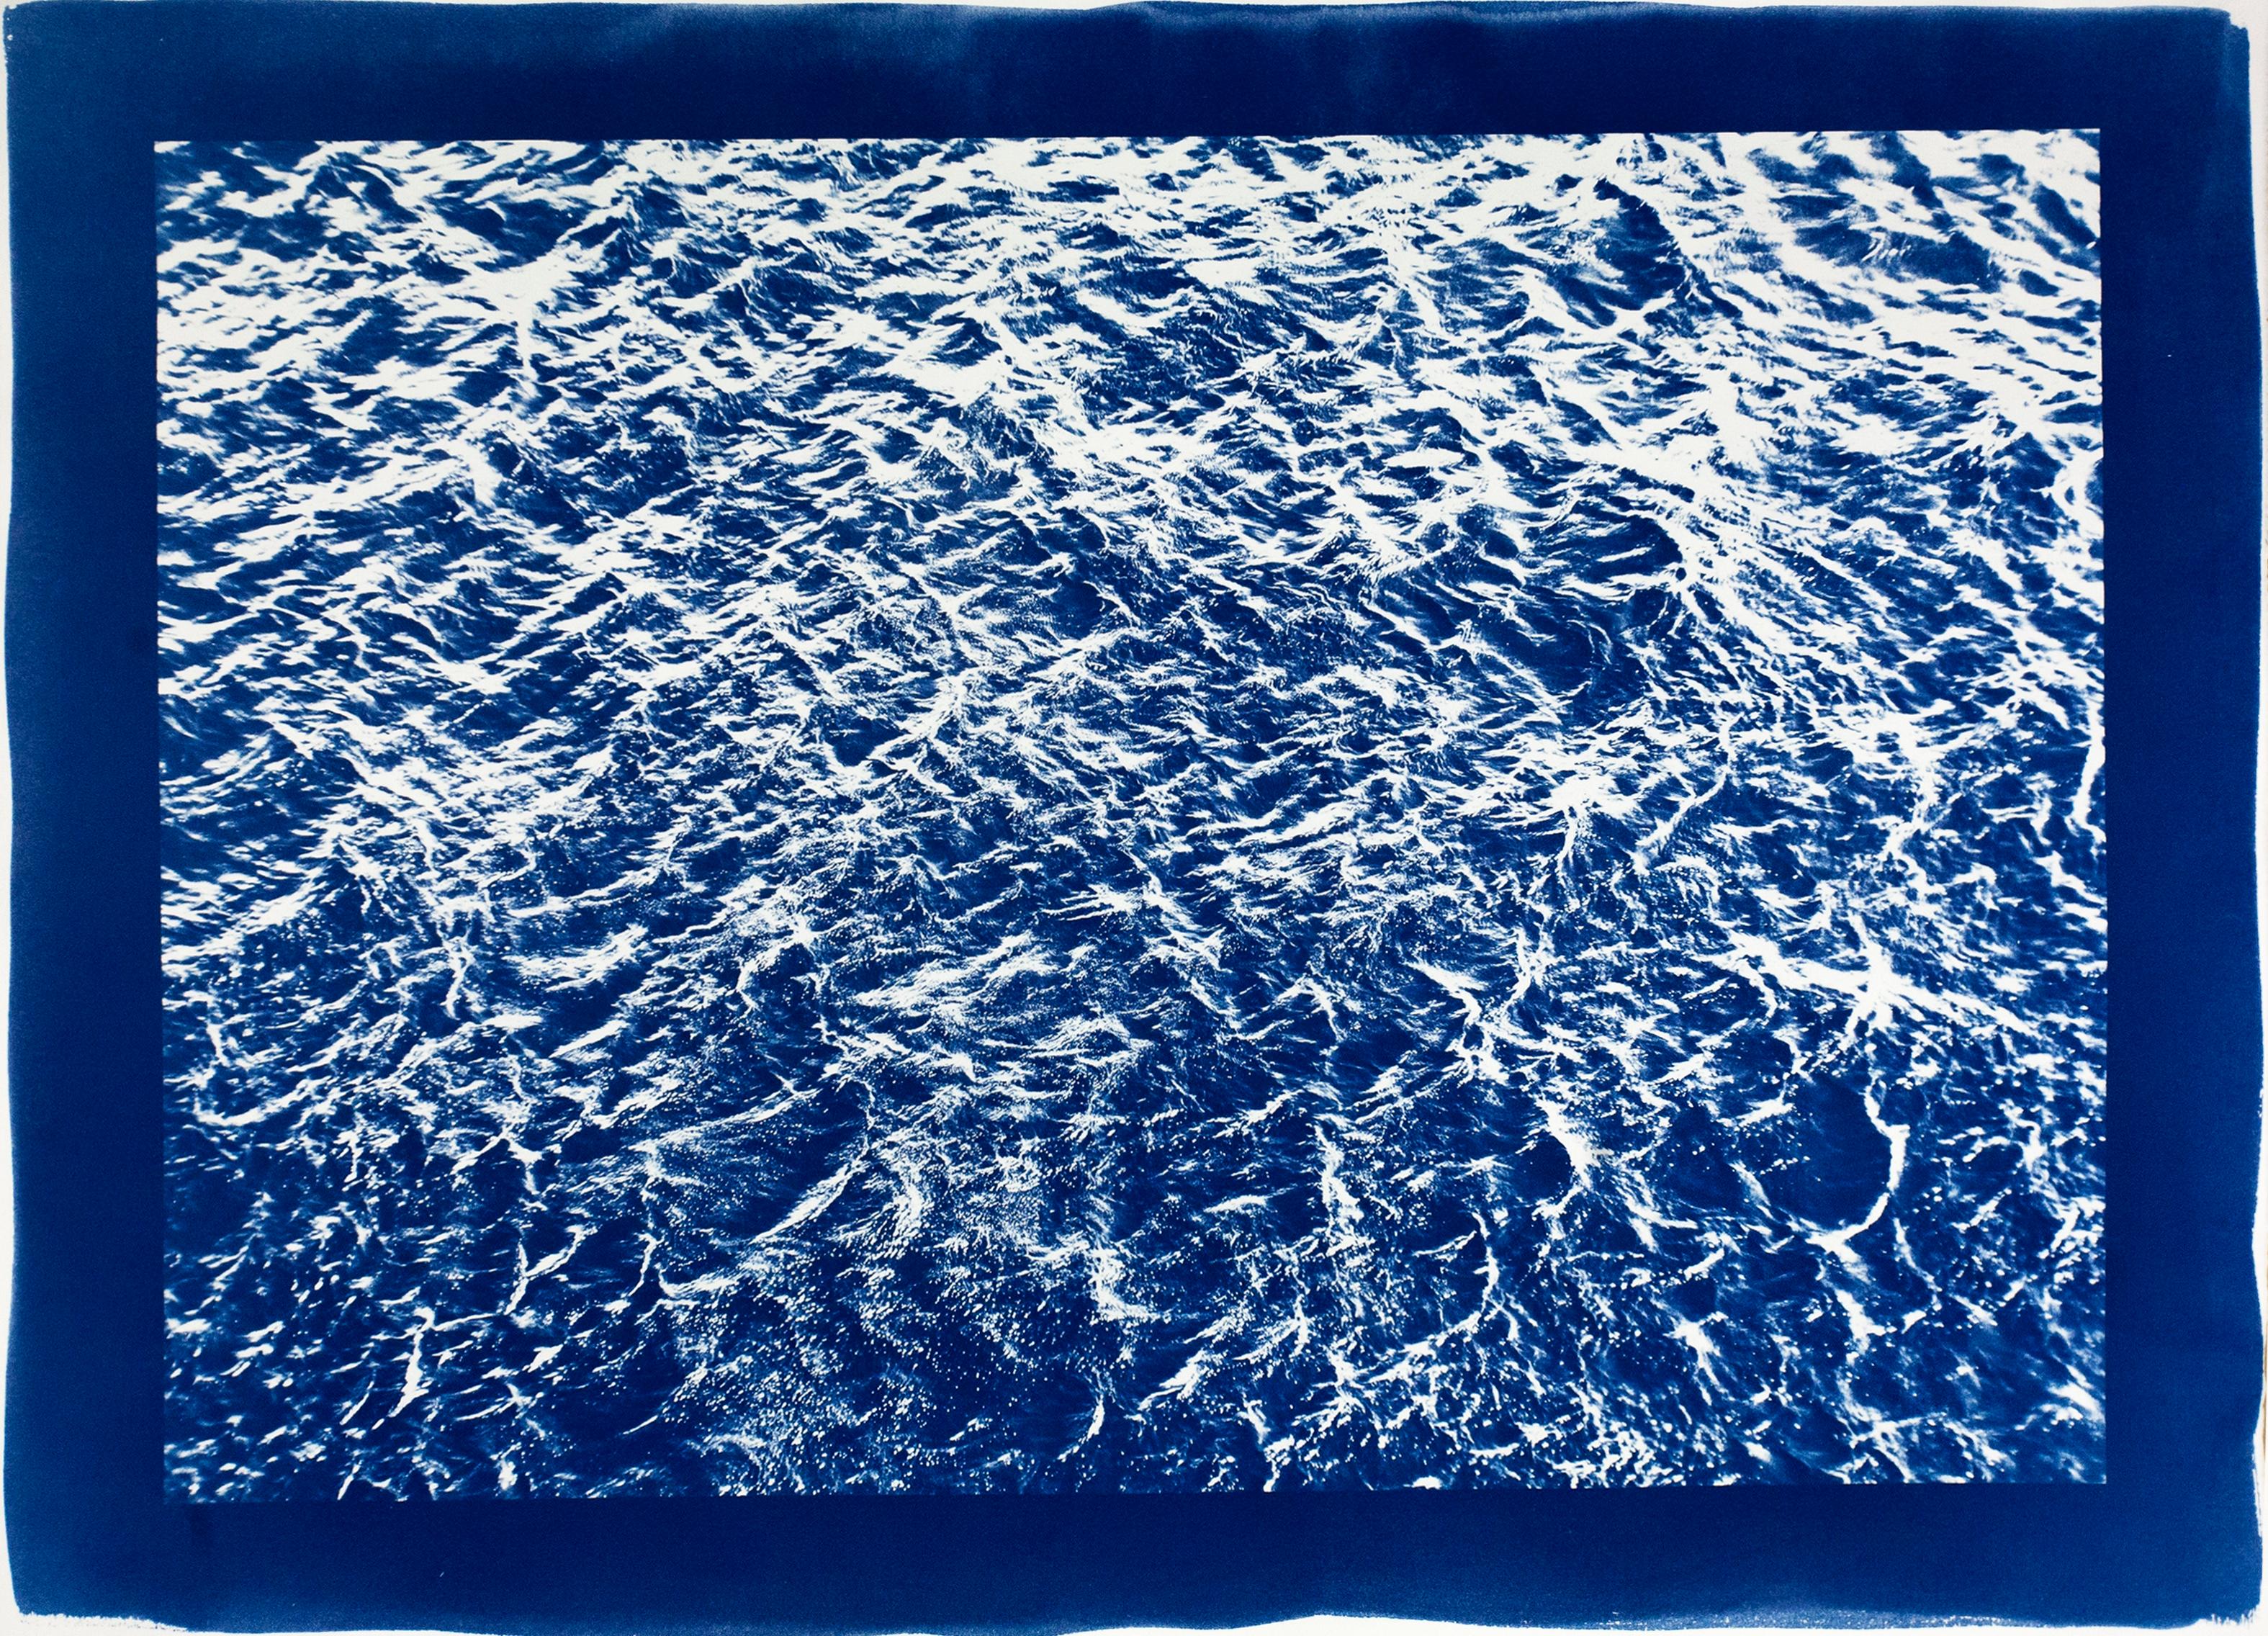 Extra Large Cyanotype Seascape of Pacific Ocean Currents, Nautical Blue & White